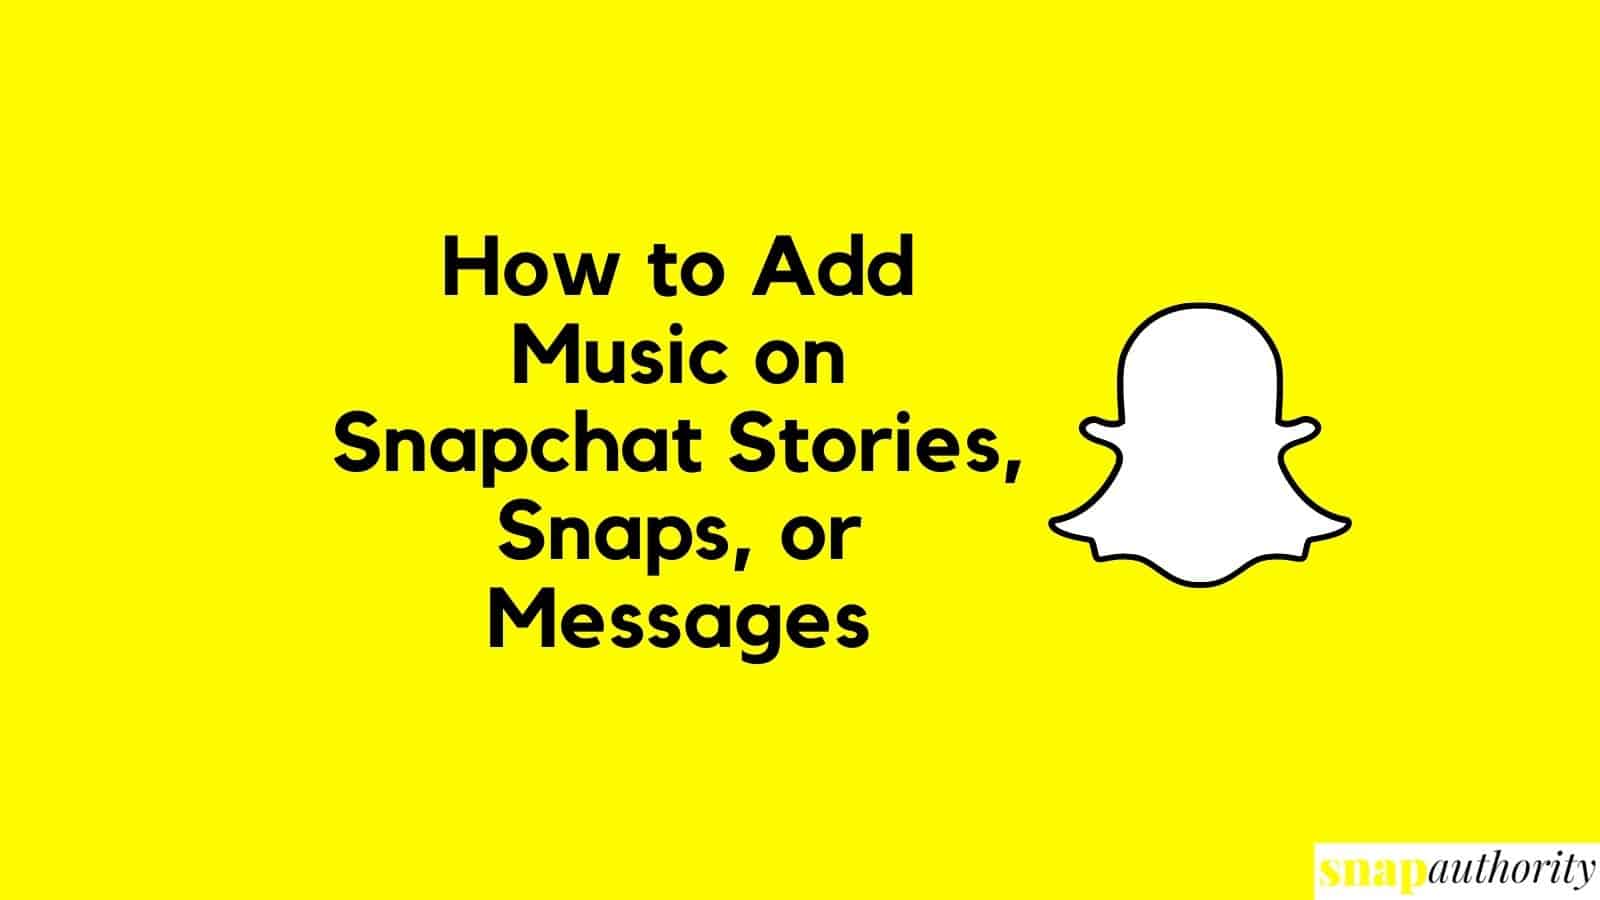 How to Add Music on Snapchat